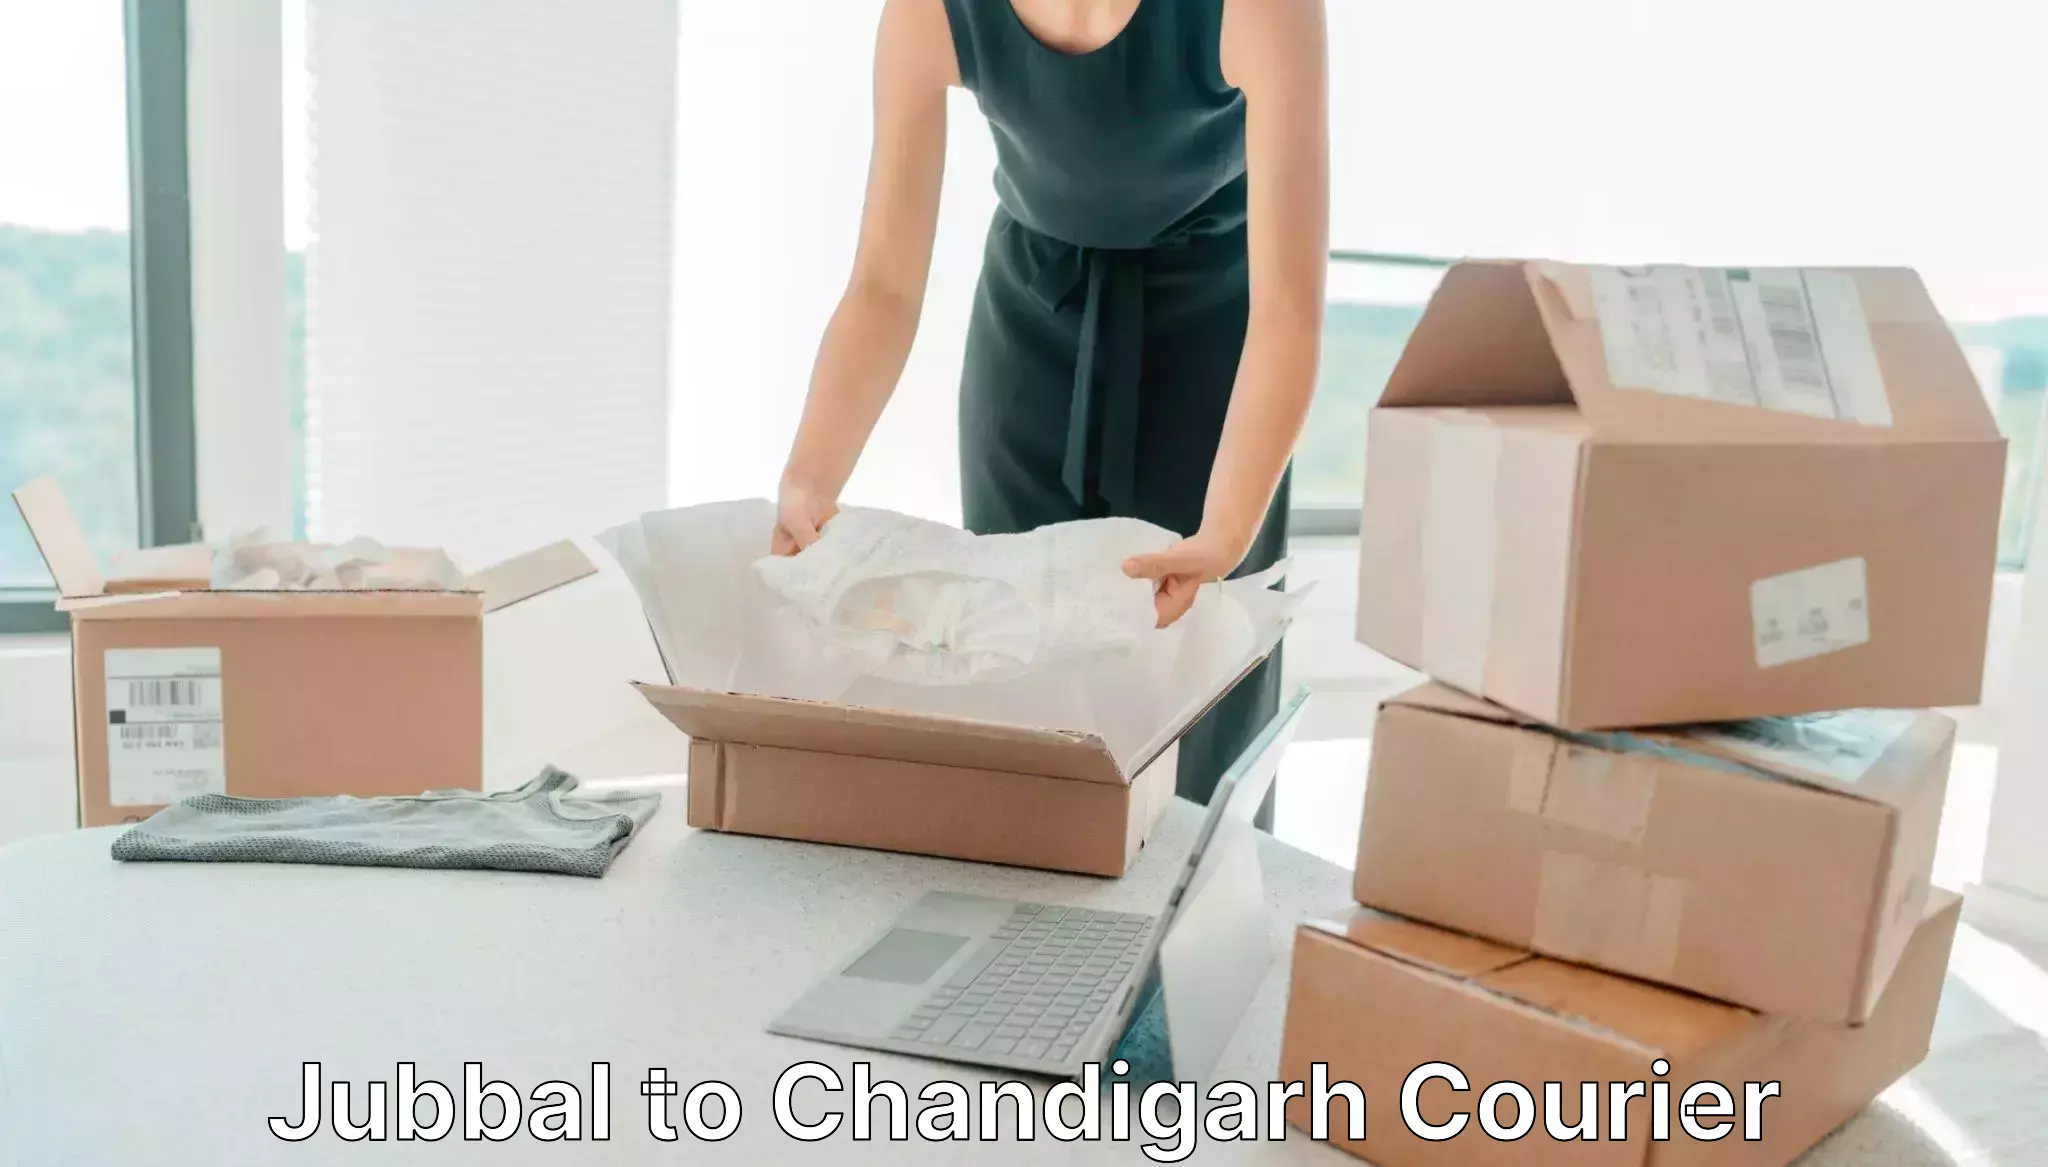 Reliable courier service Jubbal to Chandigarh